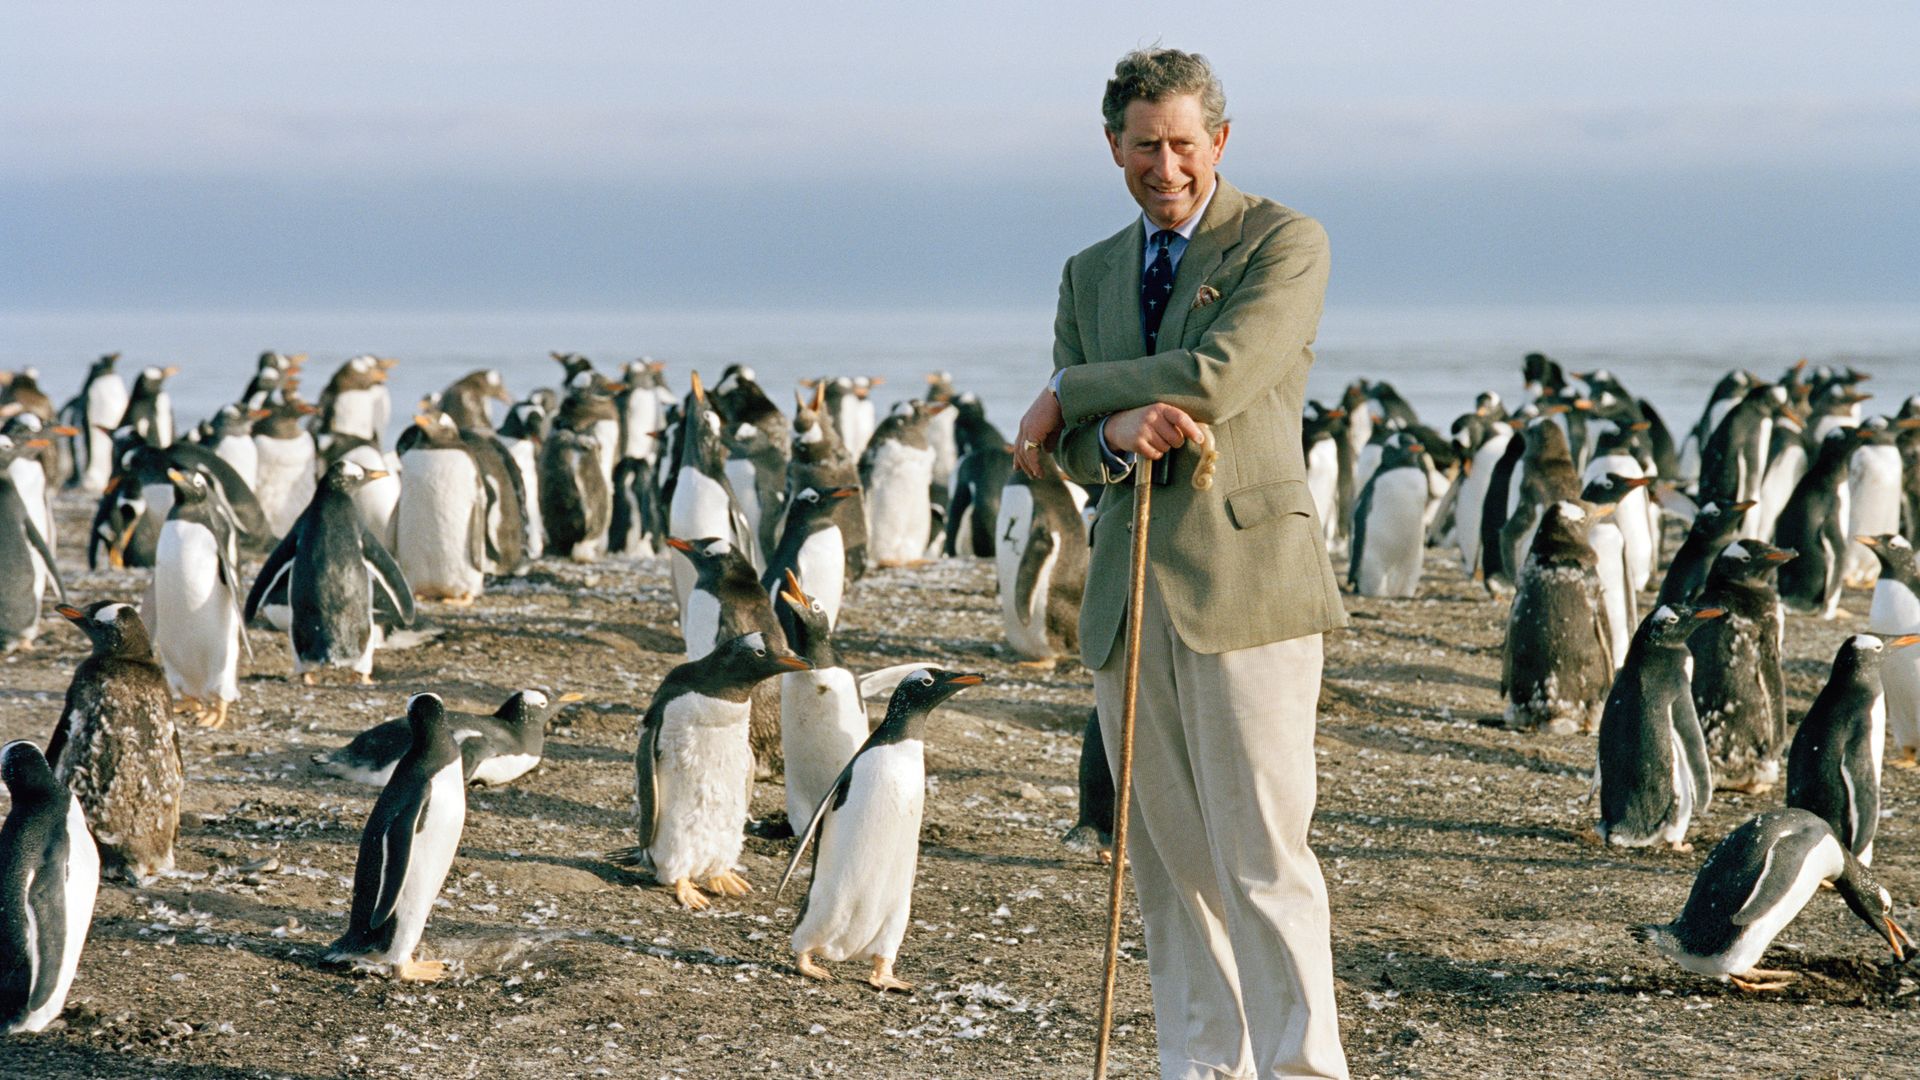 King Charles Leaning On His Crook As He Watches The Gentoo Penguins During His Visit To Sea Lion Island In The Falkland Isles. 